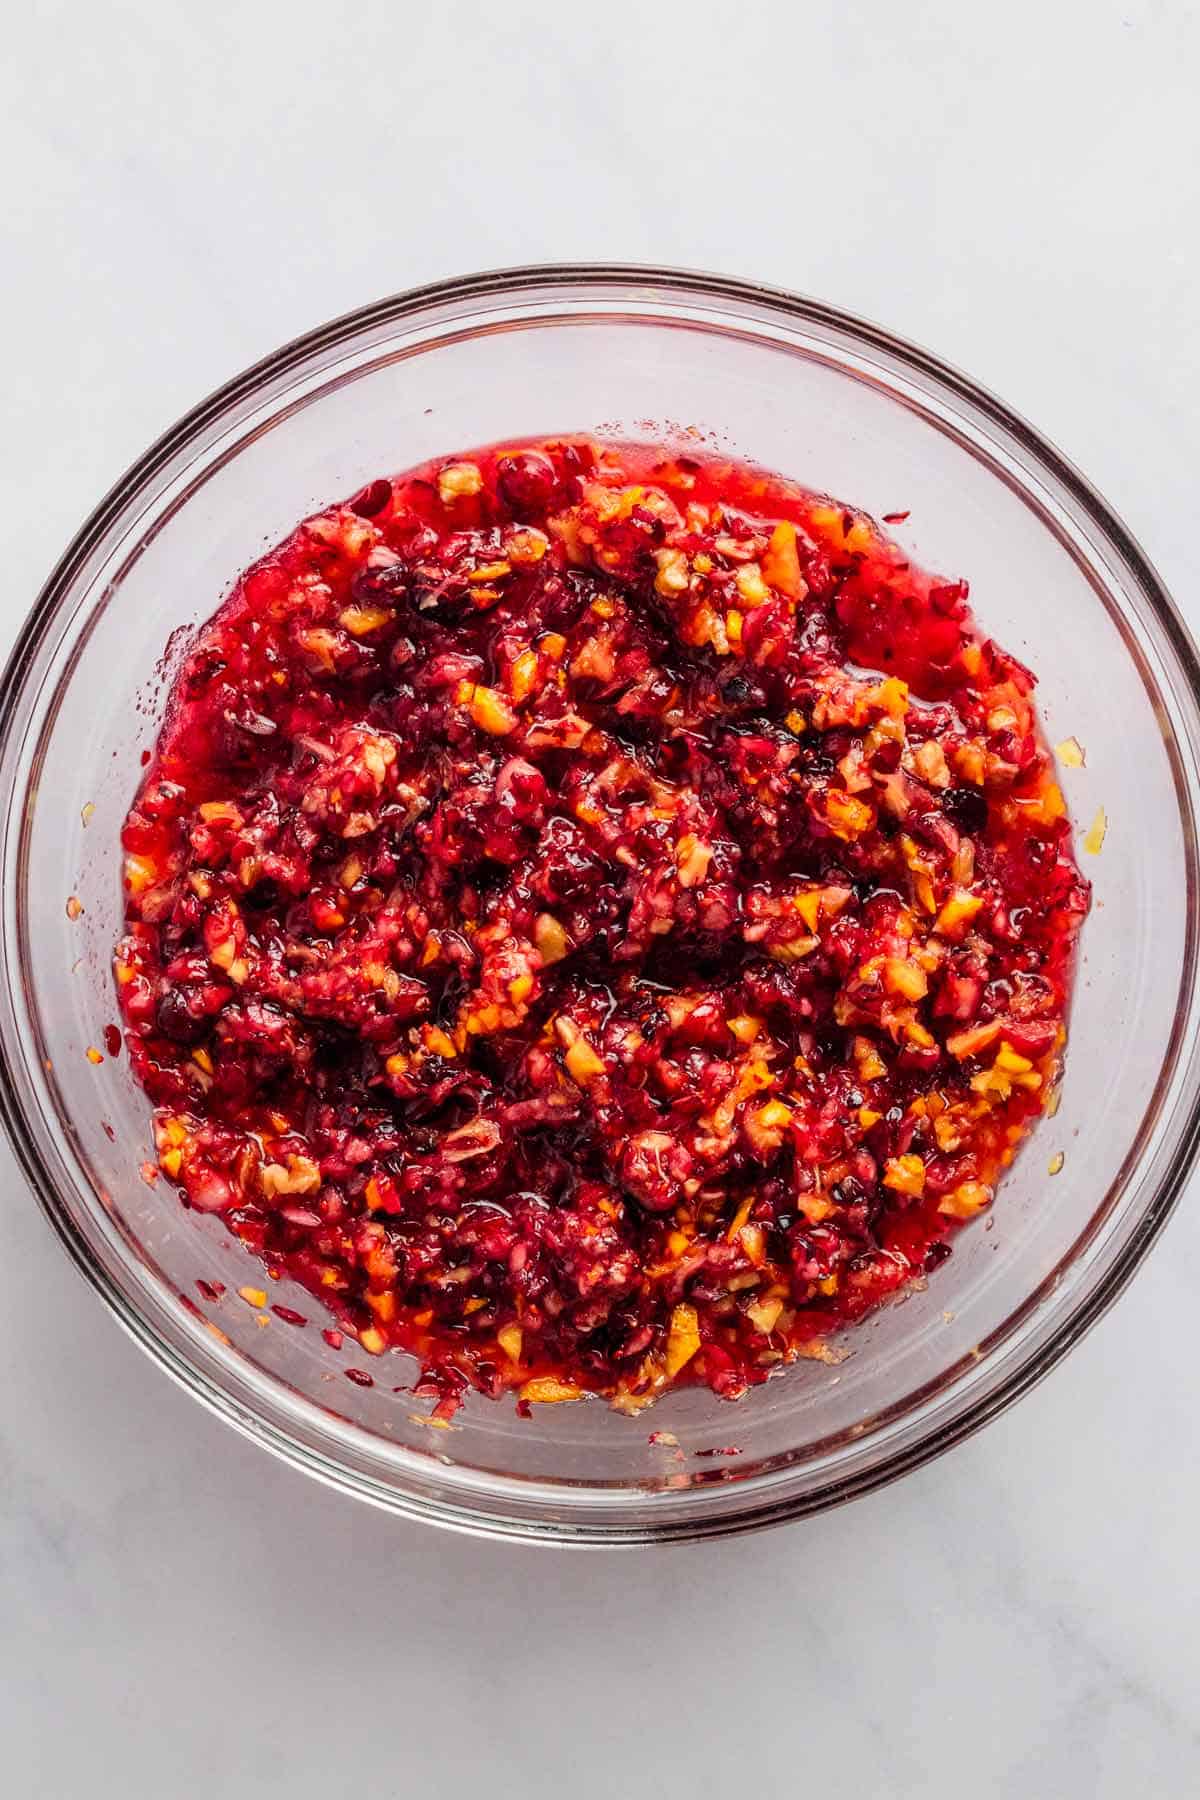 blended cranberry relish in food processor.